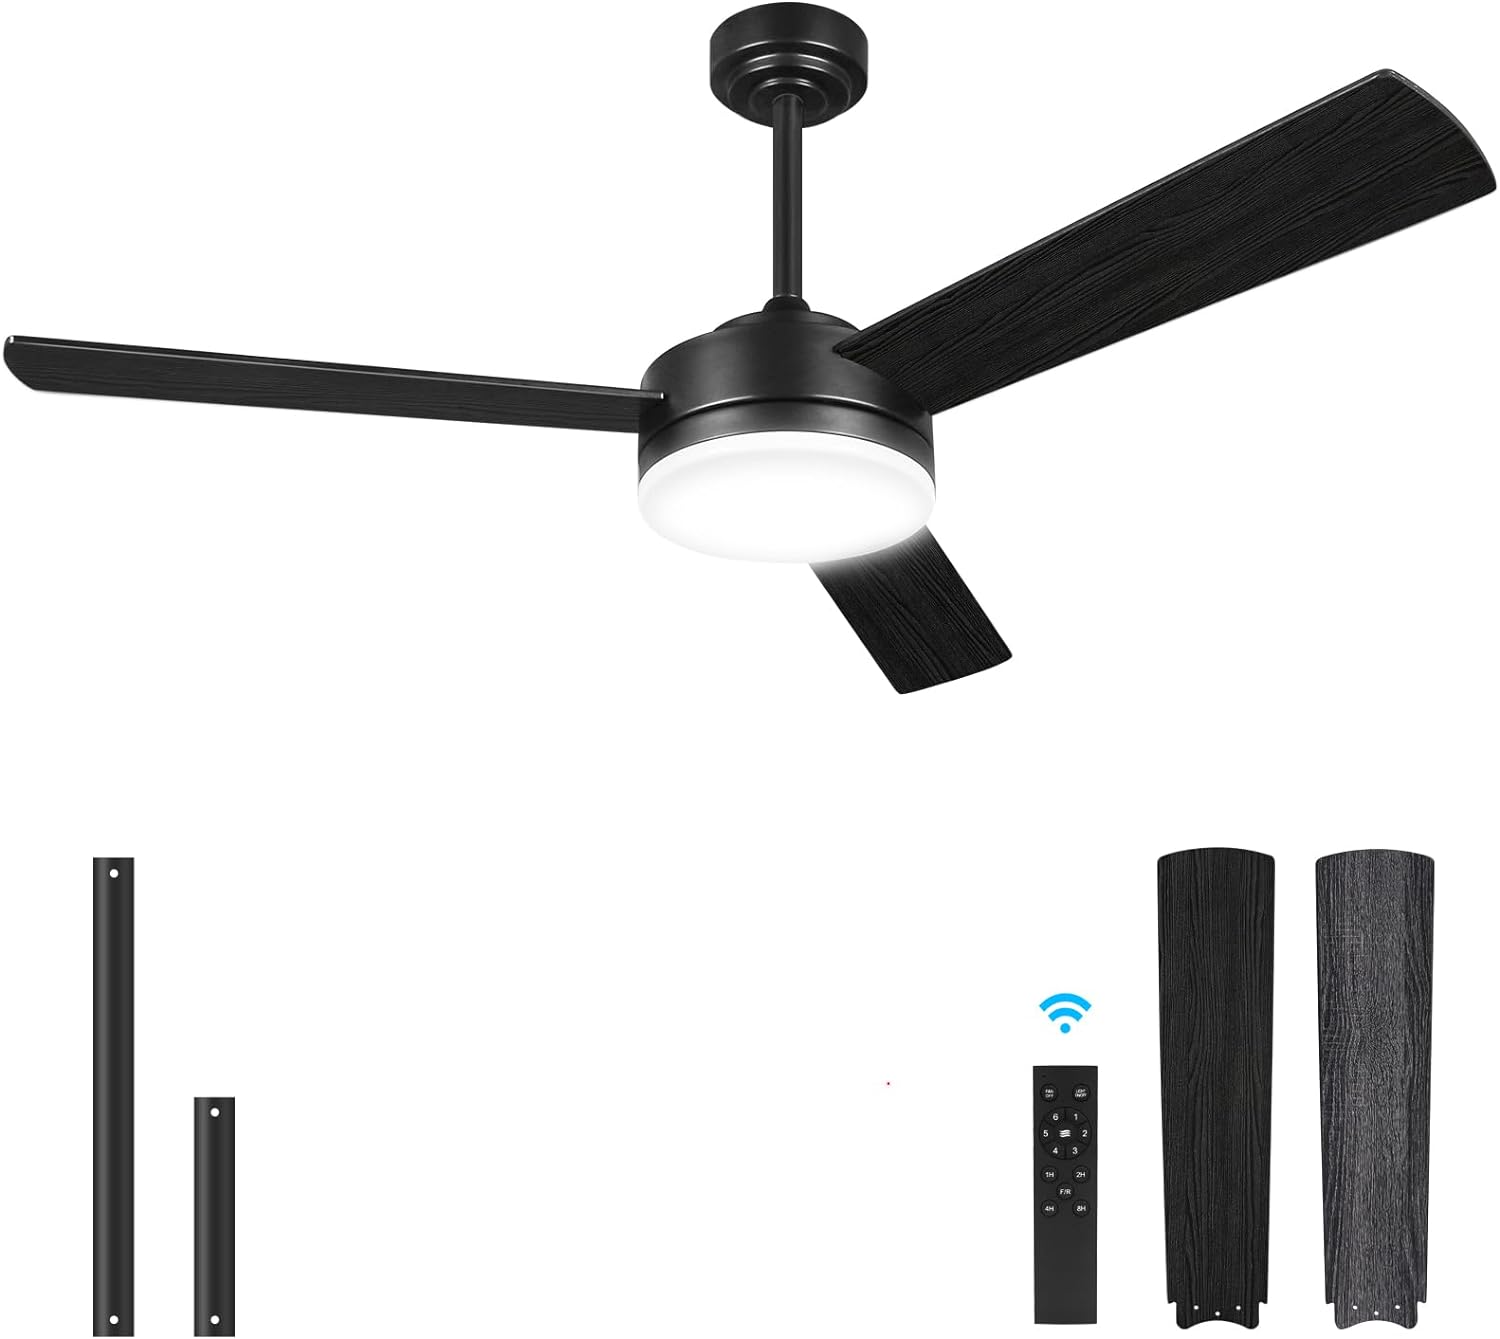 Black Ceiling Fans with Lights and Remote, Modern Ceiling Fan, Indoor Outdoor Ceiling Fans with Lights, 20W 3-Color LED Light, Noiseless Reversible DC Motor (52)